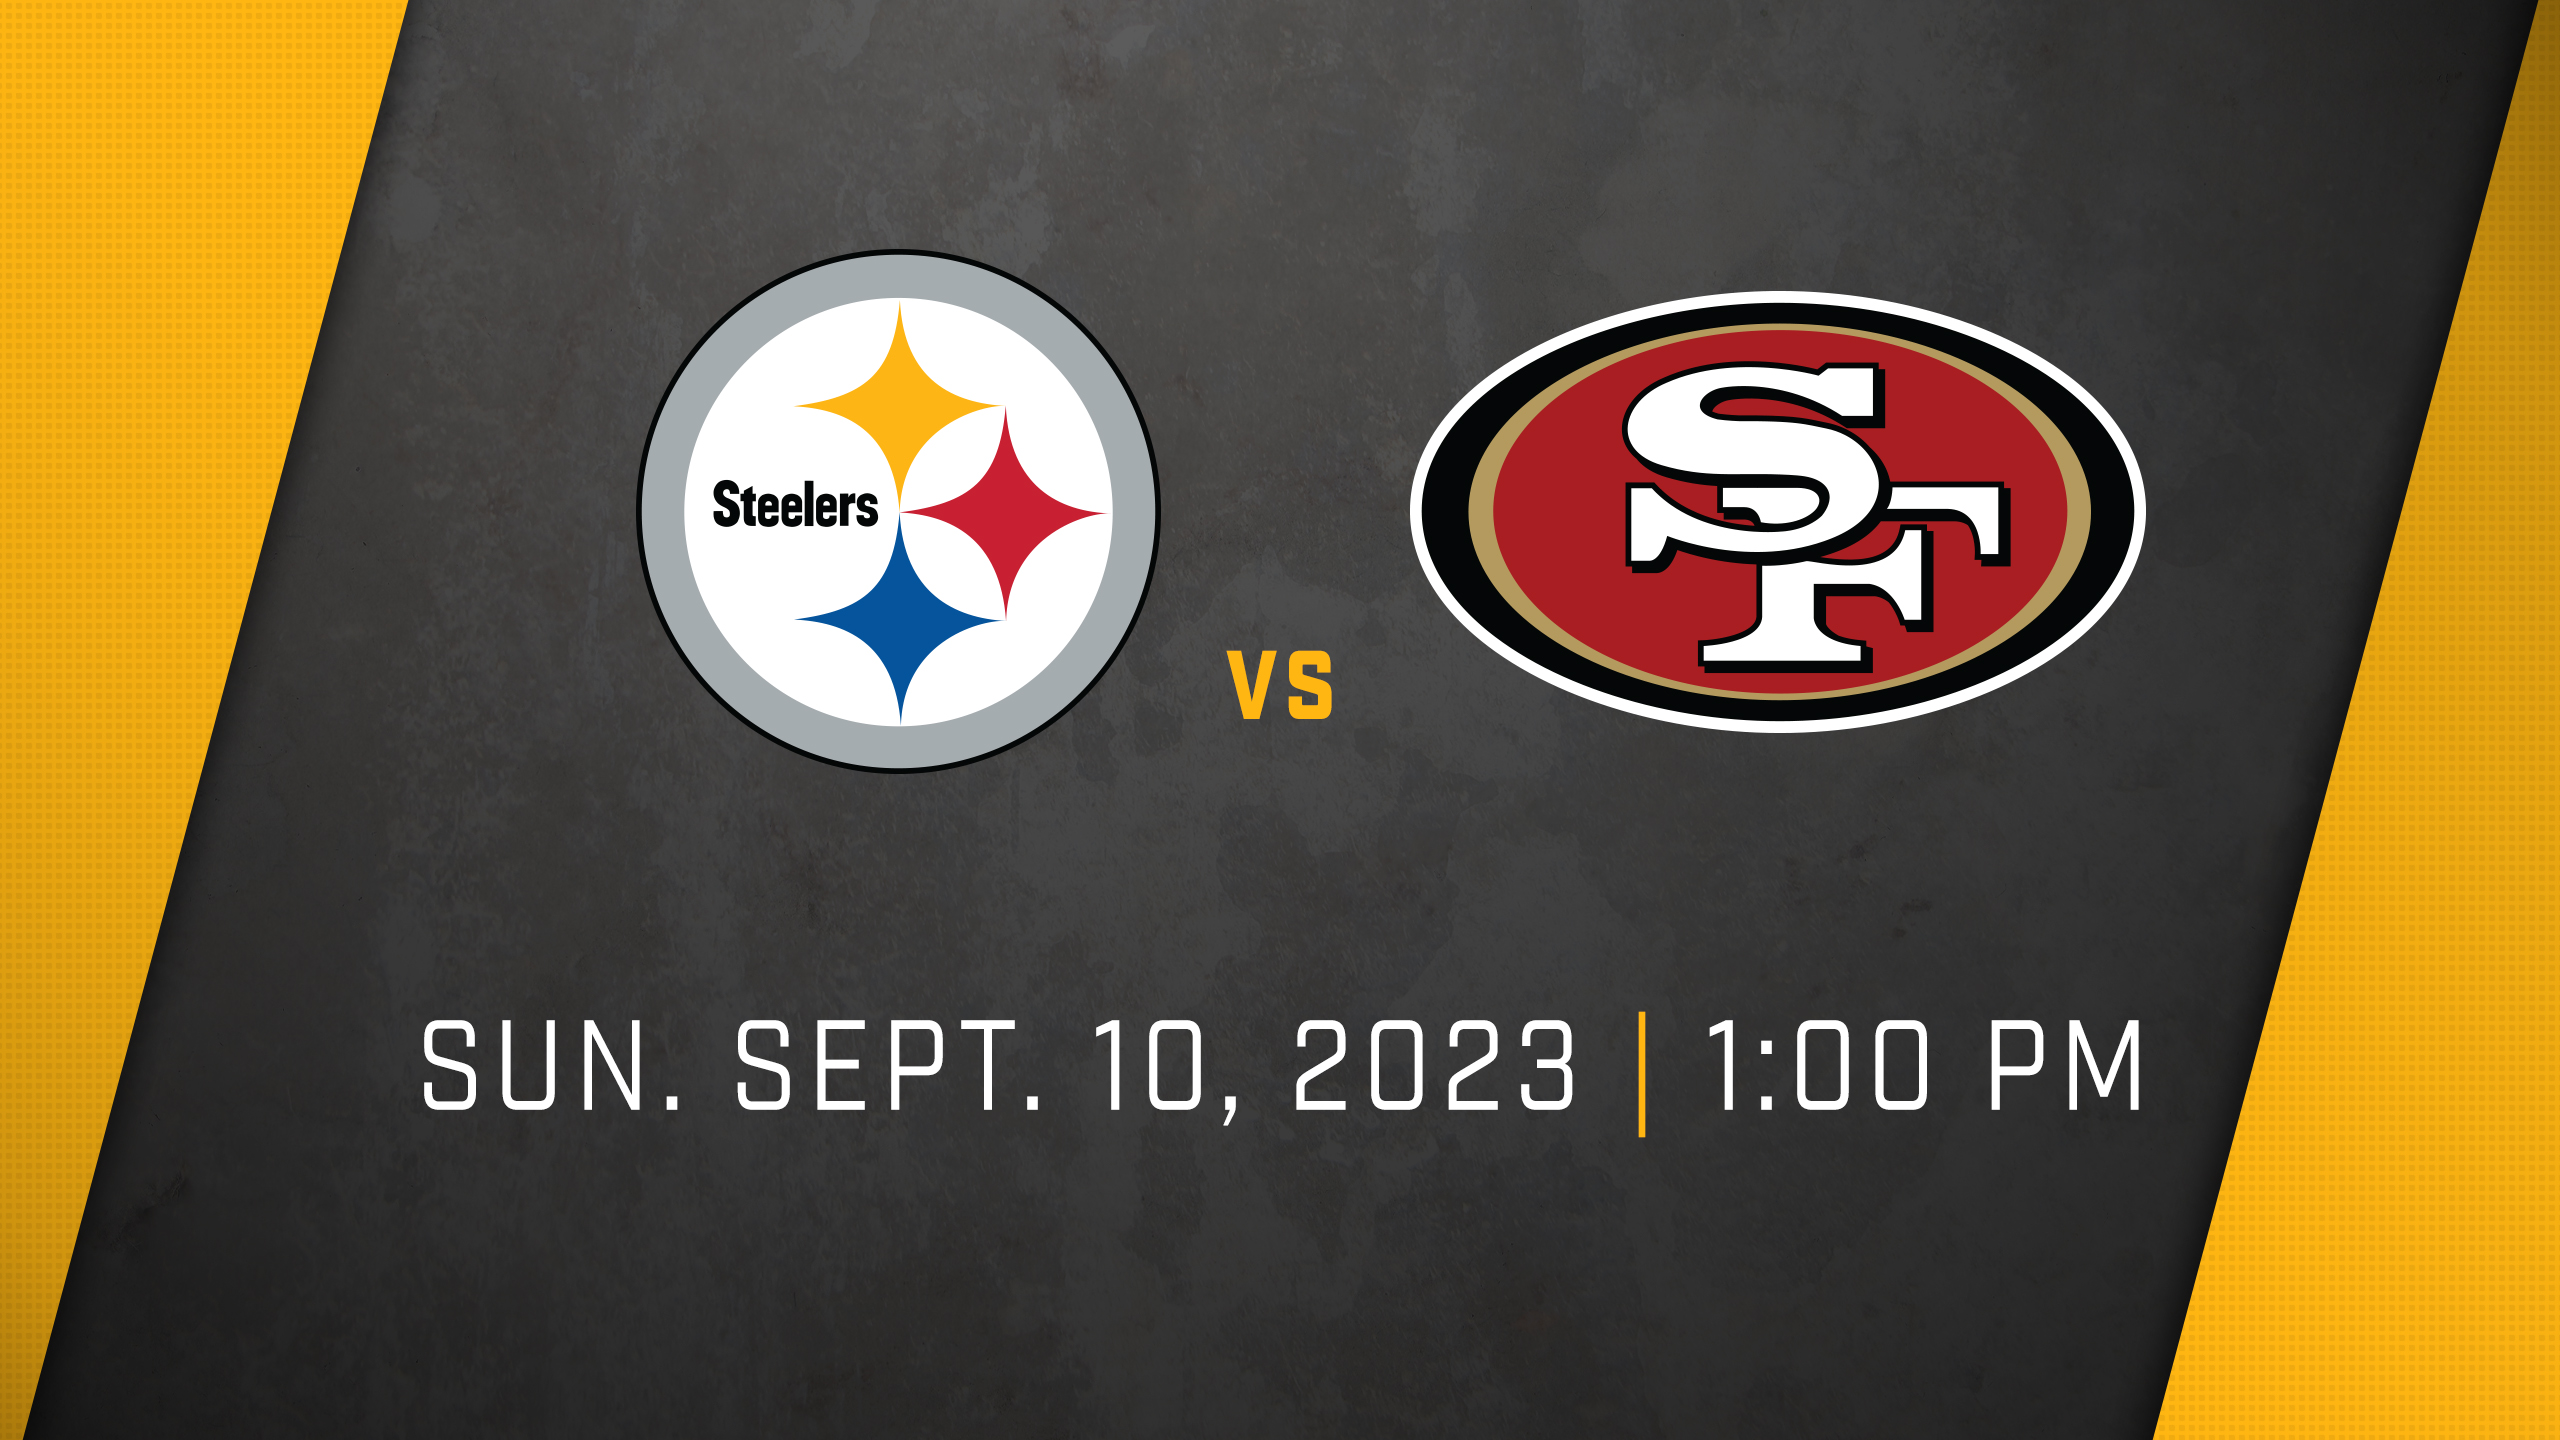 Steelers / 49ers matchup graphic